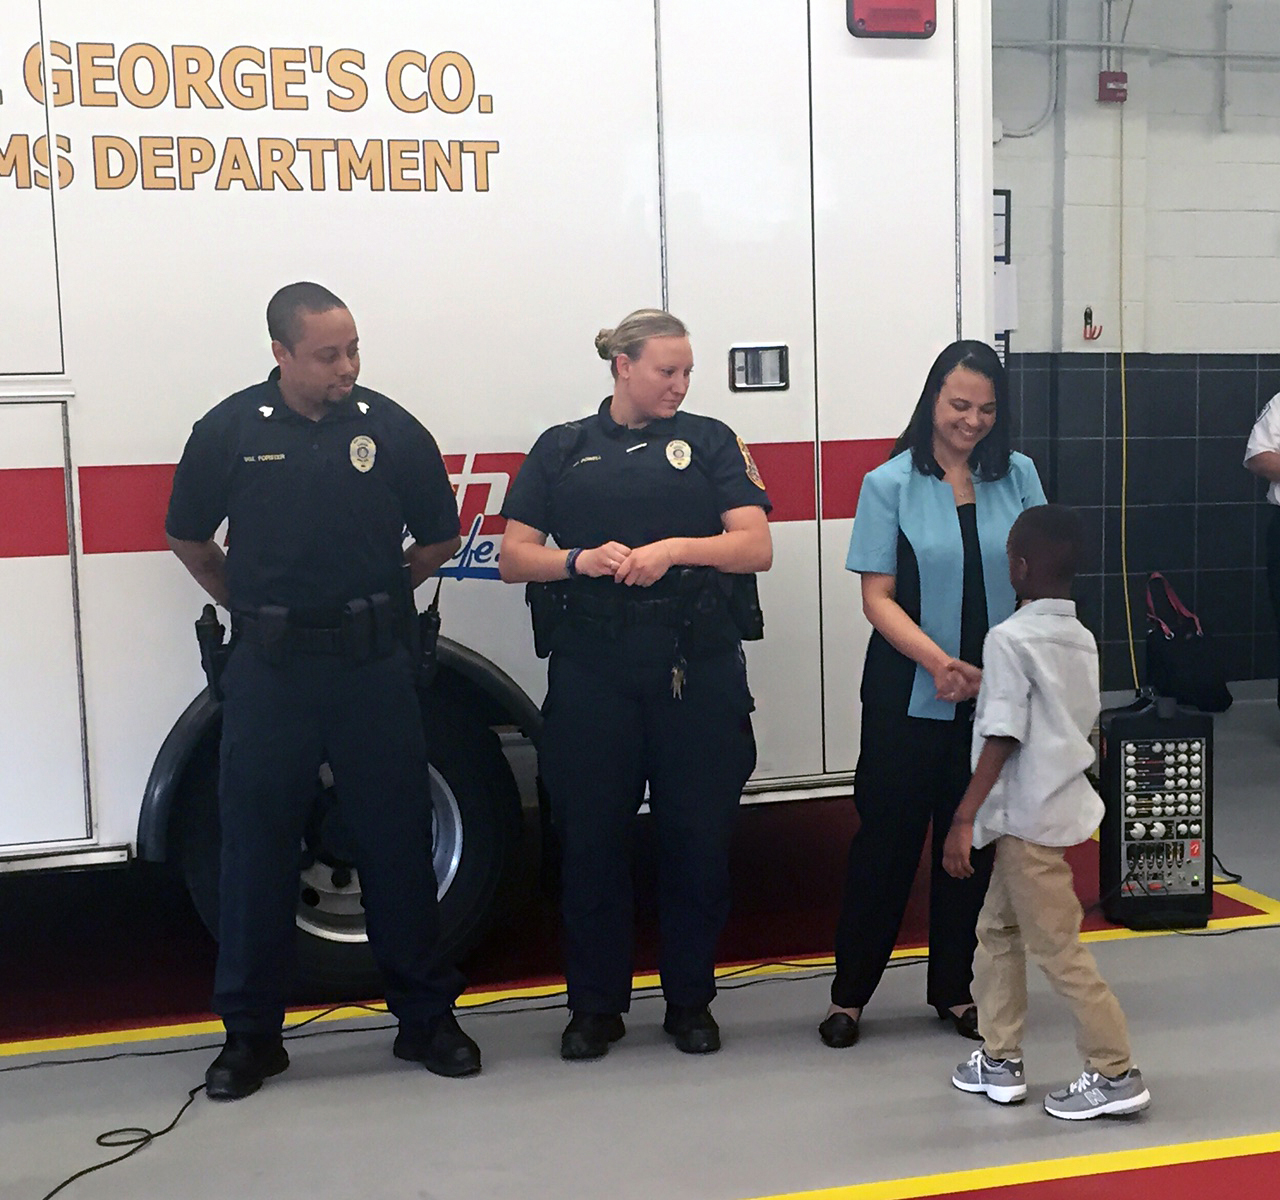 Dahmari Jenkins shakes hands with the dispatcher and Seat Pleasant officers who helped him. (WTOP/Megan Cloherty)